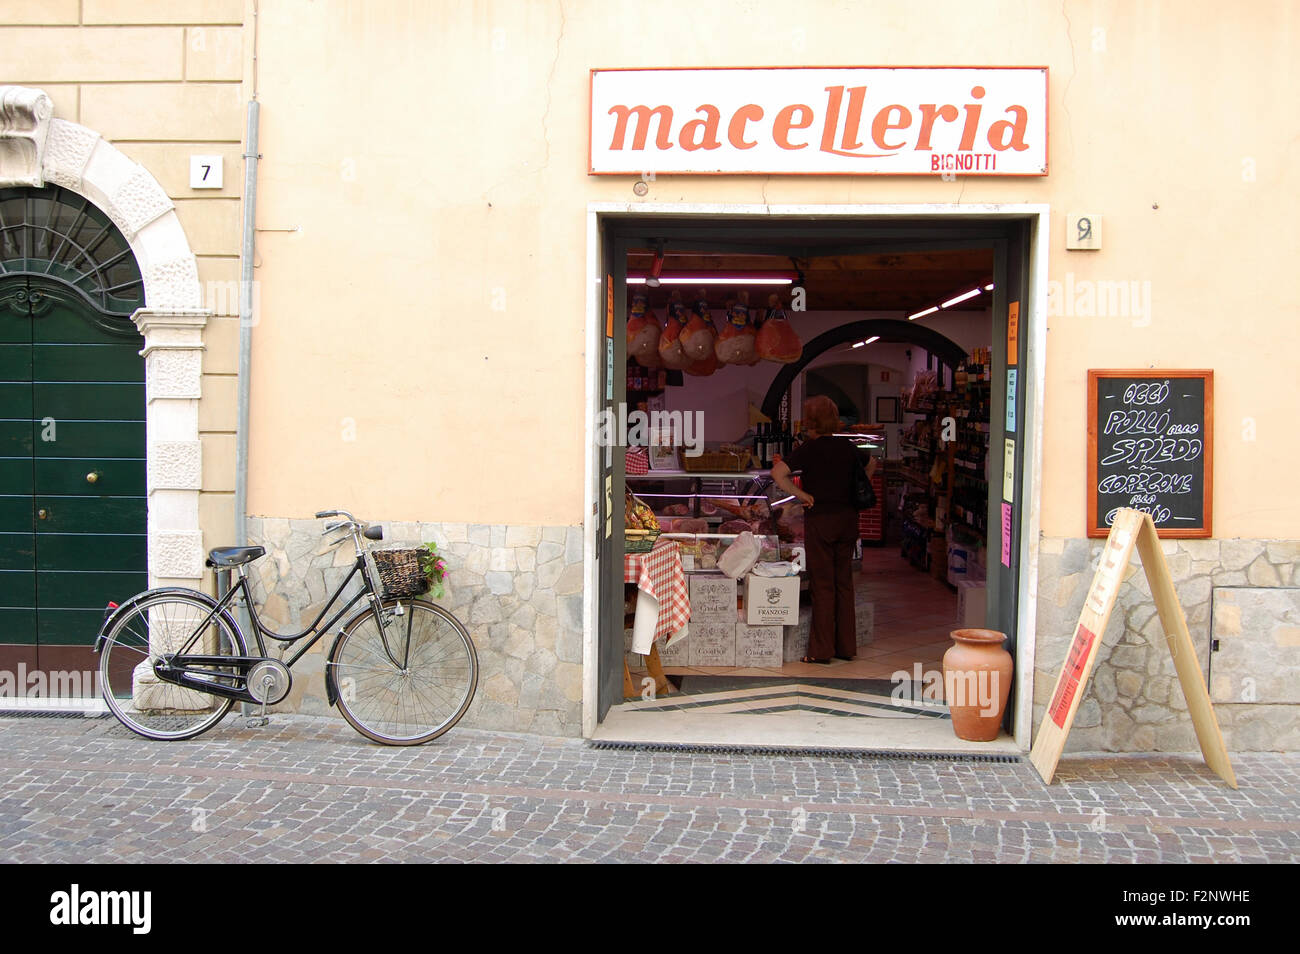 Customer waiting, her bicycle parked outside, in the delicatessen Macelleria in the small town of Gargnano, Lake Garda in Italy Stock Photo